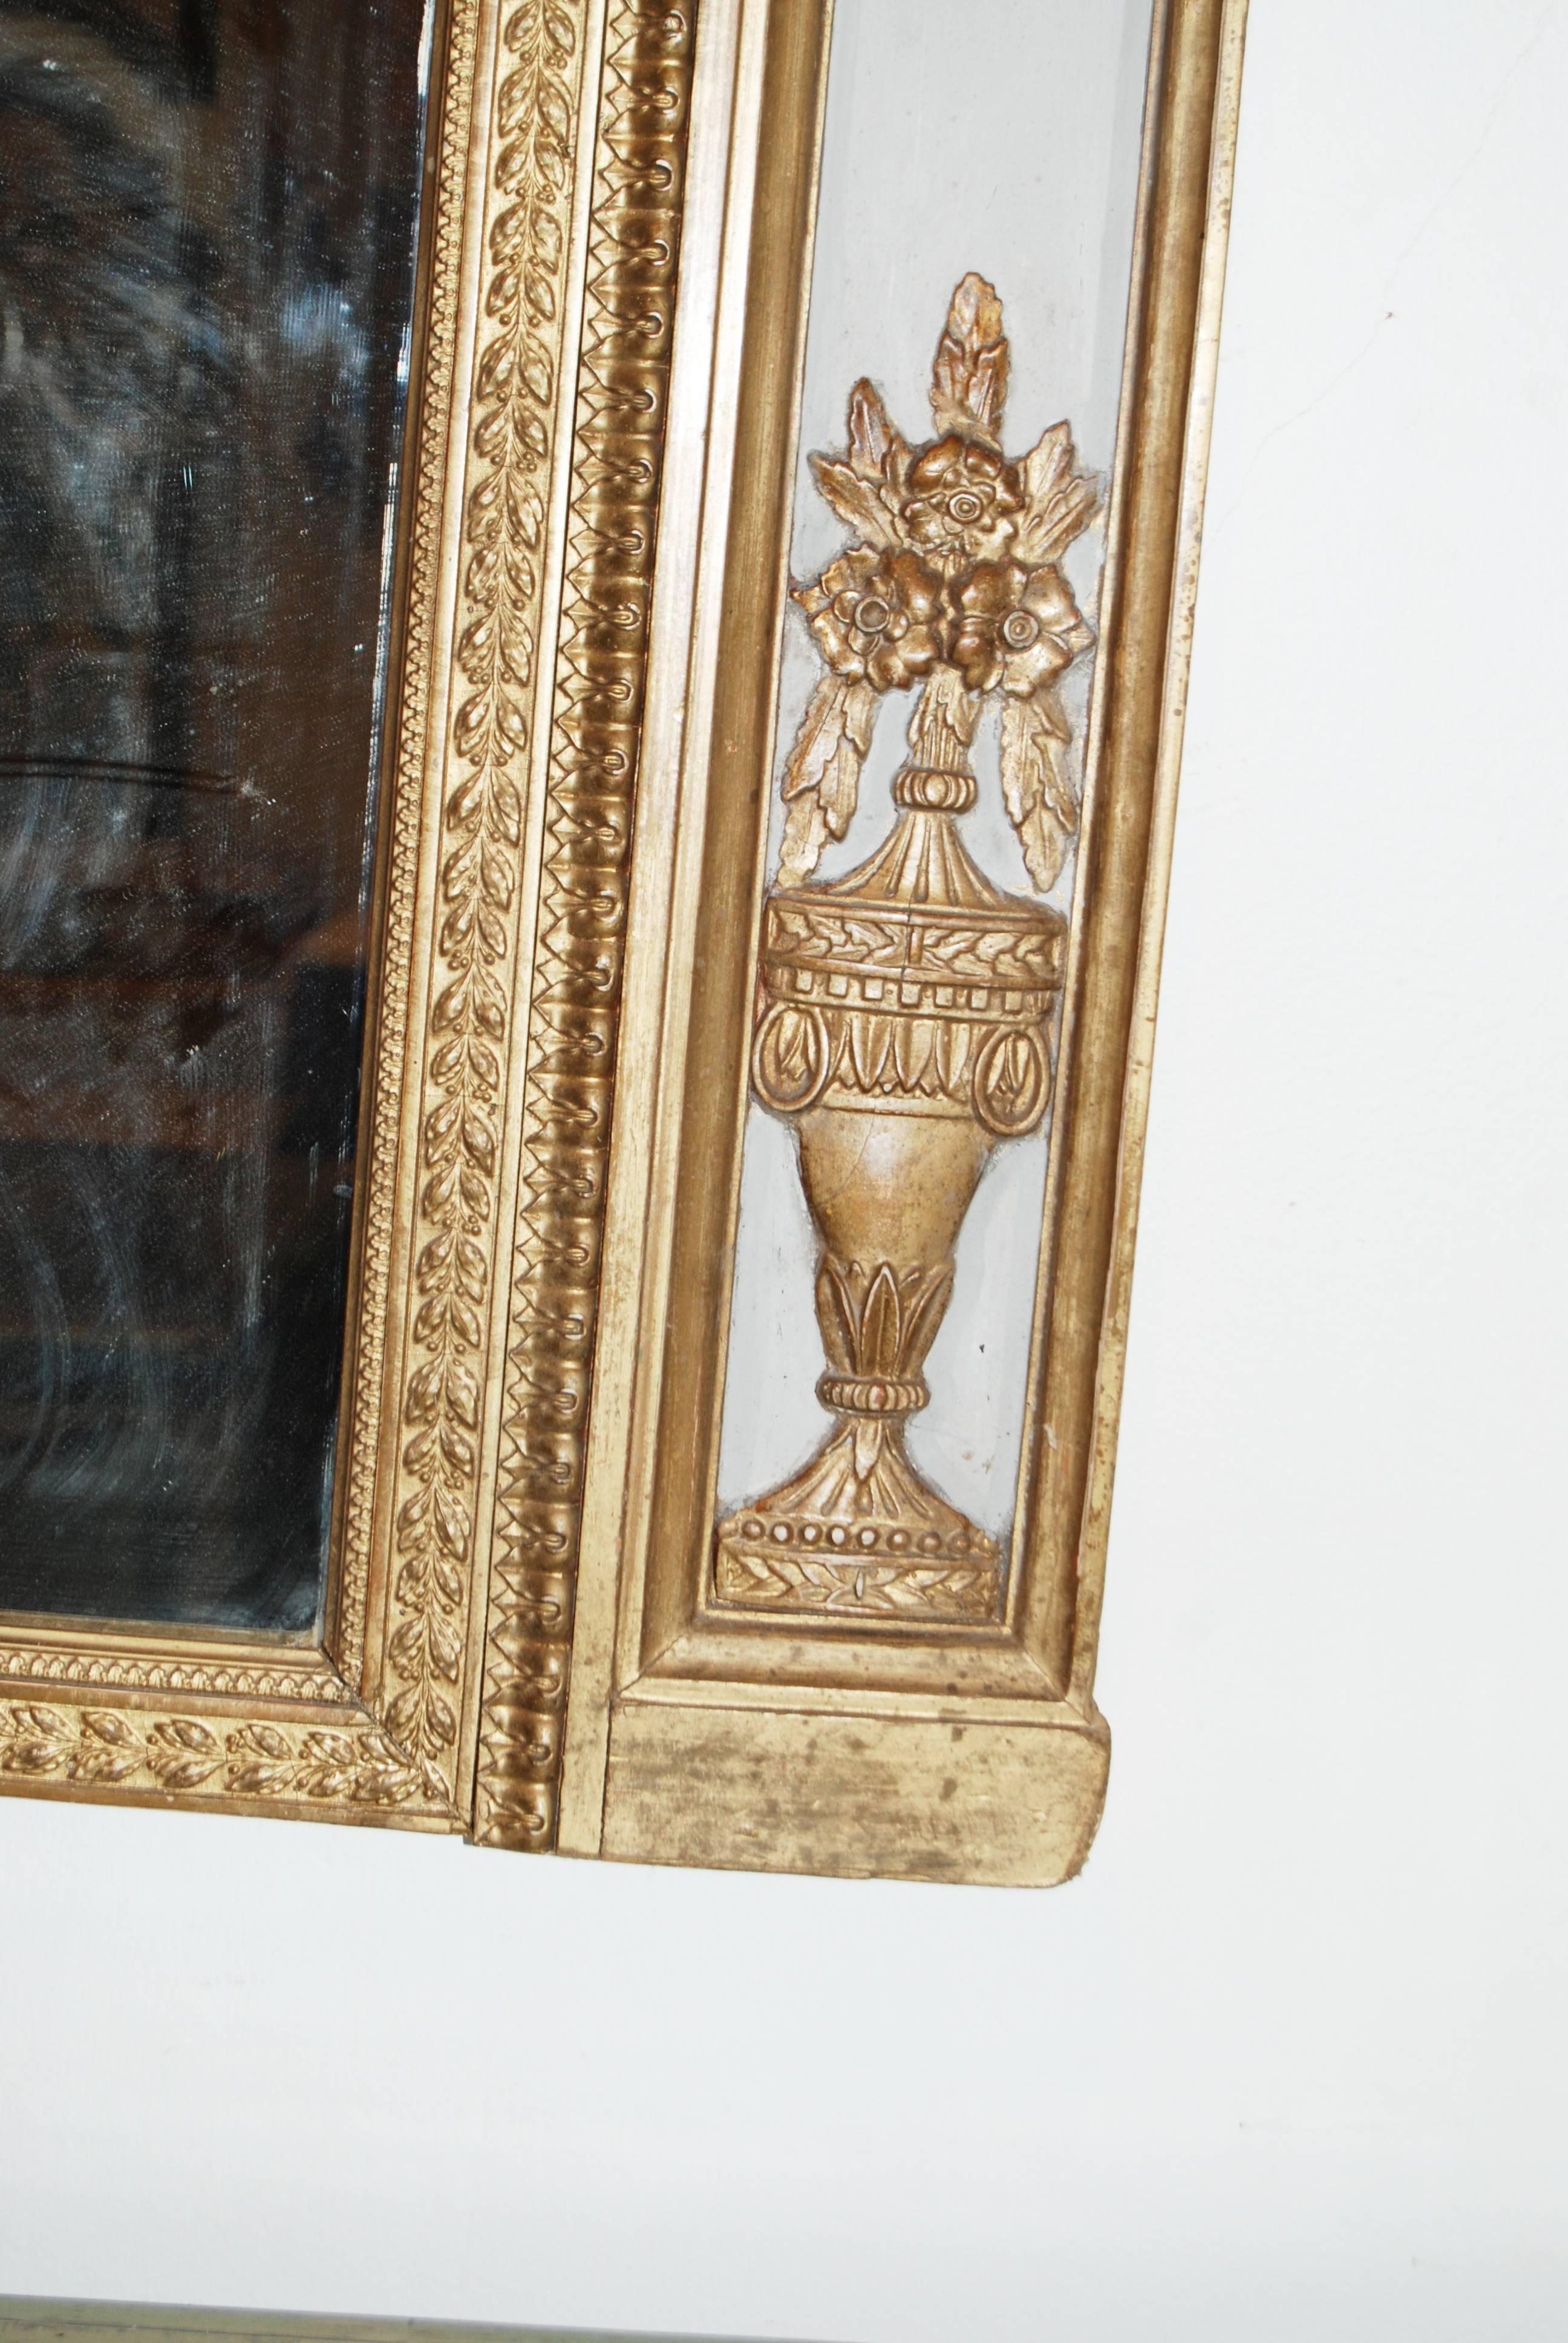 Carved and gilded trumeau mirror.